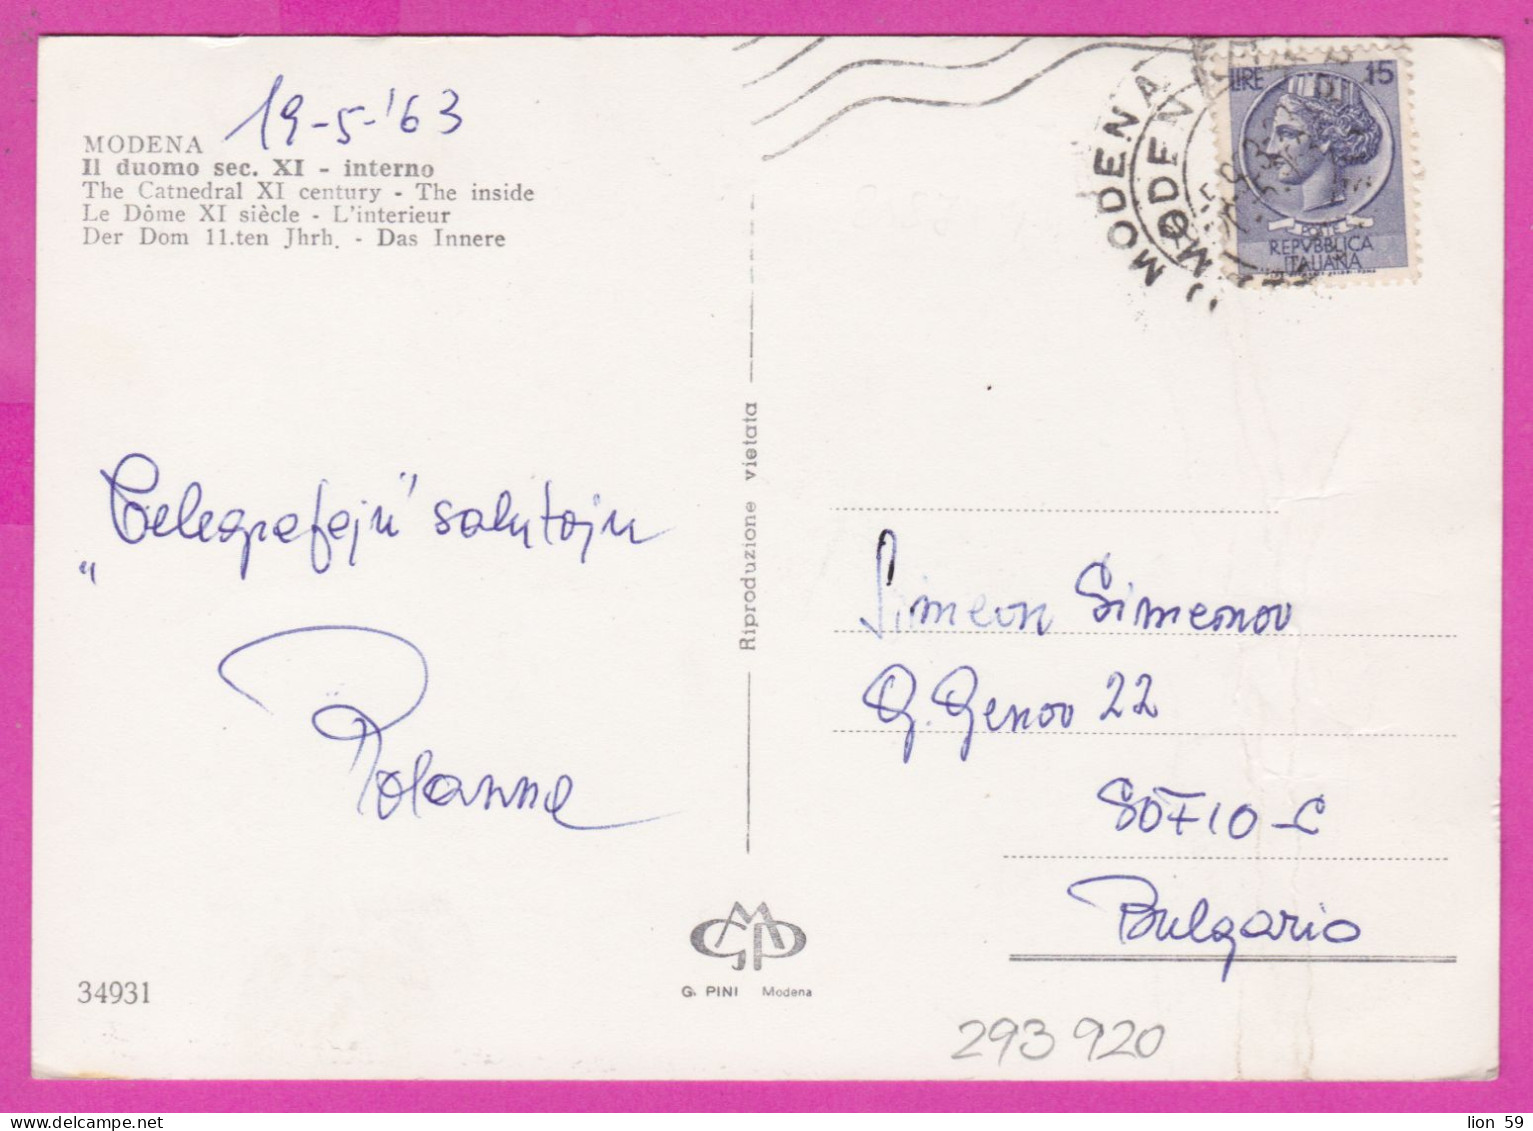 293920 / Italy - MODENA - The Cathedral XI Century The Inside PC 1963 USED 15 L Coin Of Syracuse - 1961-70: Storia Postale